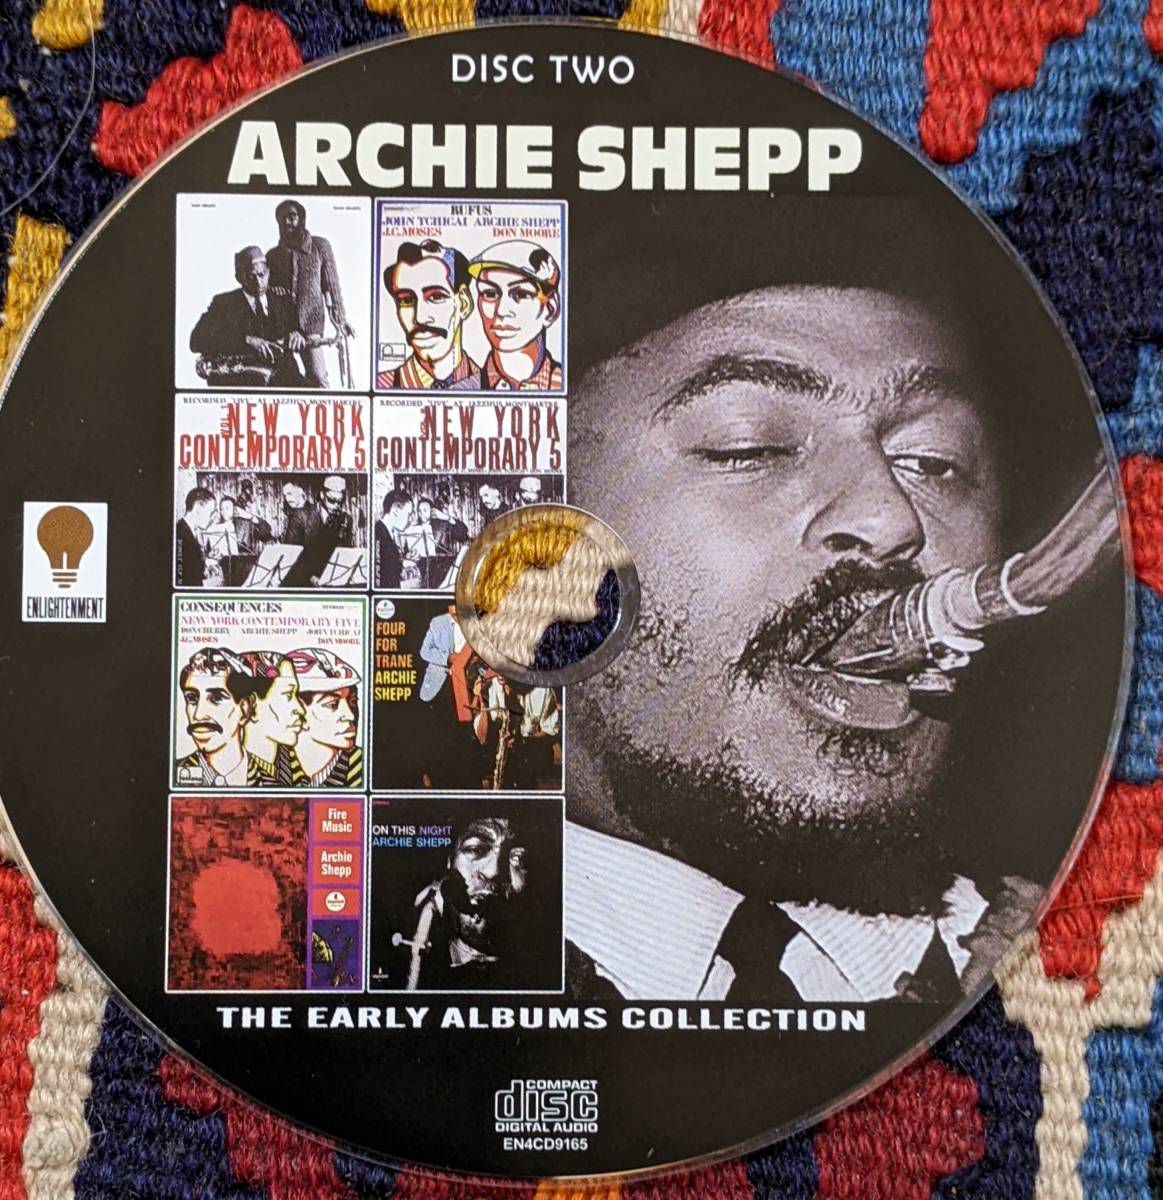 60's アーチー・シェップ Archie Shepp (9in4 4枚組CD)/ The Early Albums Collection 　Enlightenment EN4CD9165_画像7